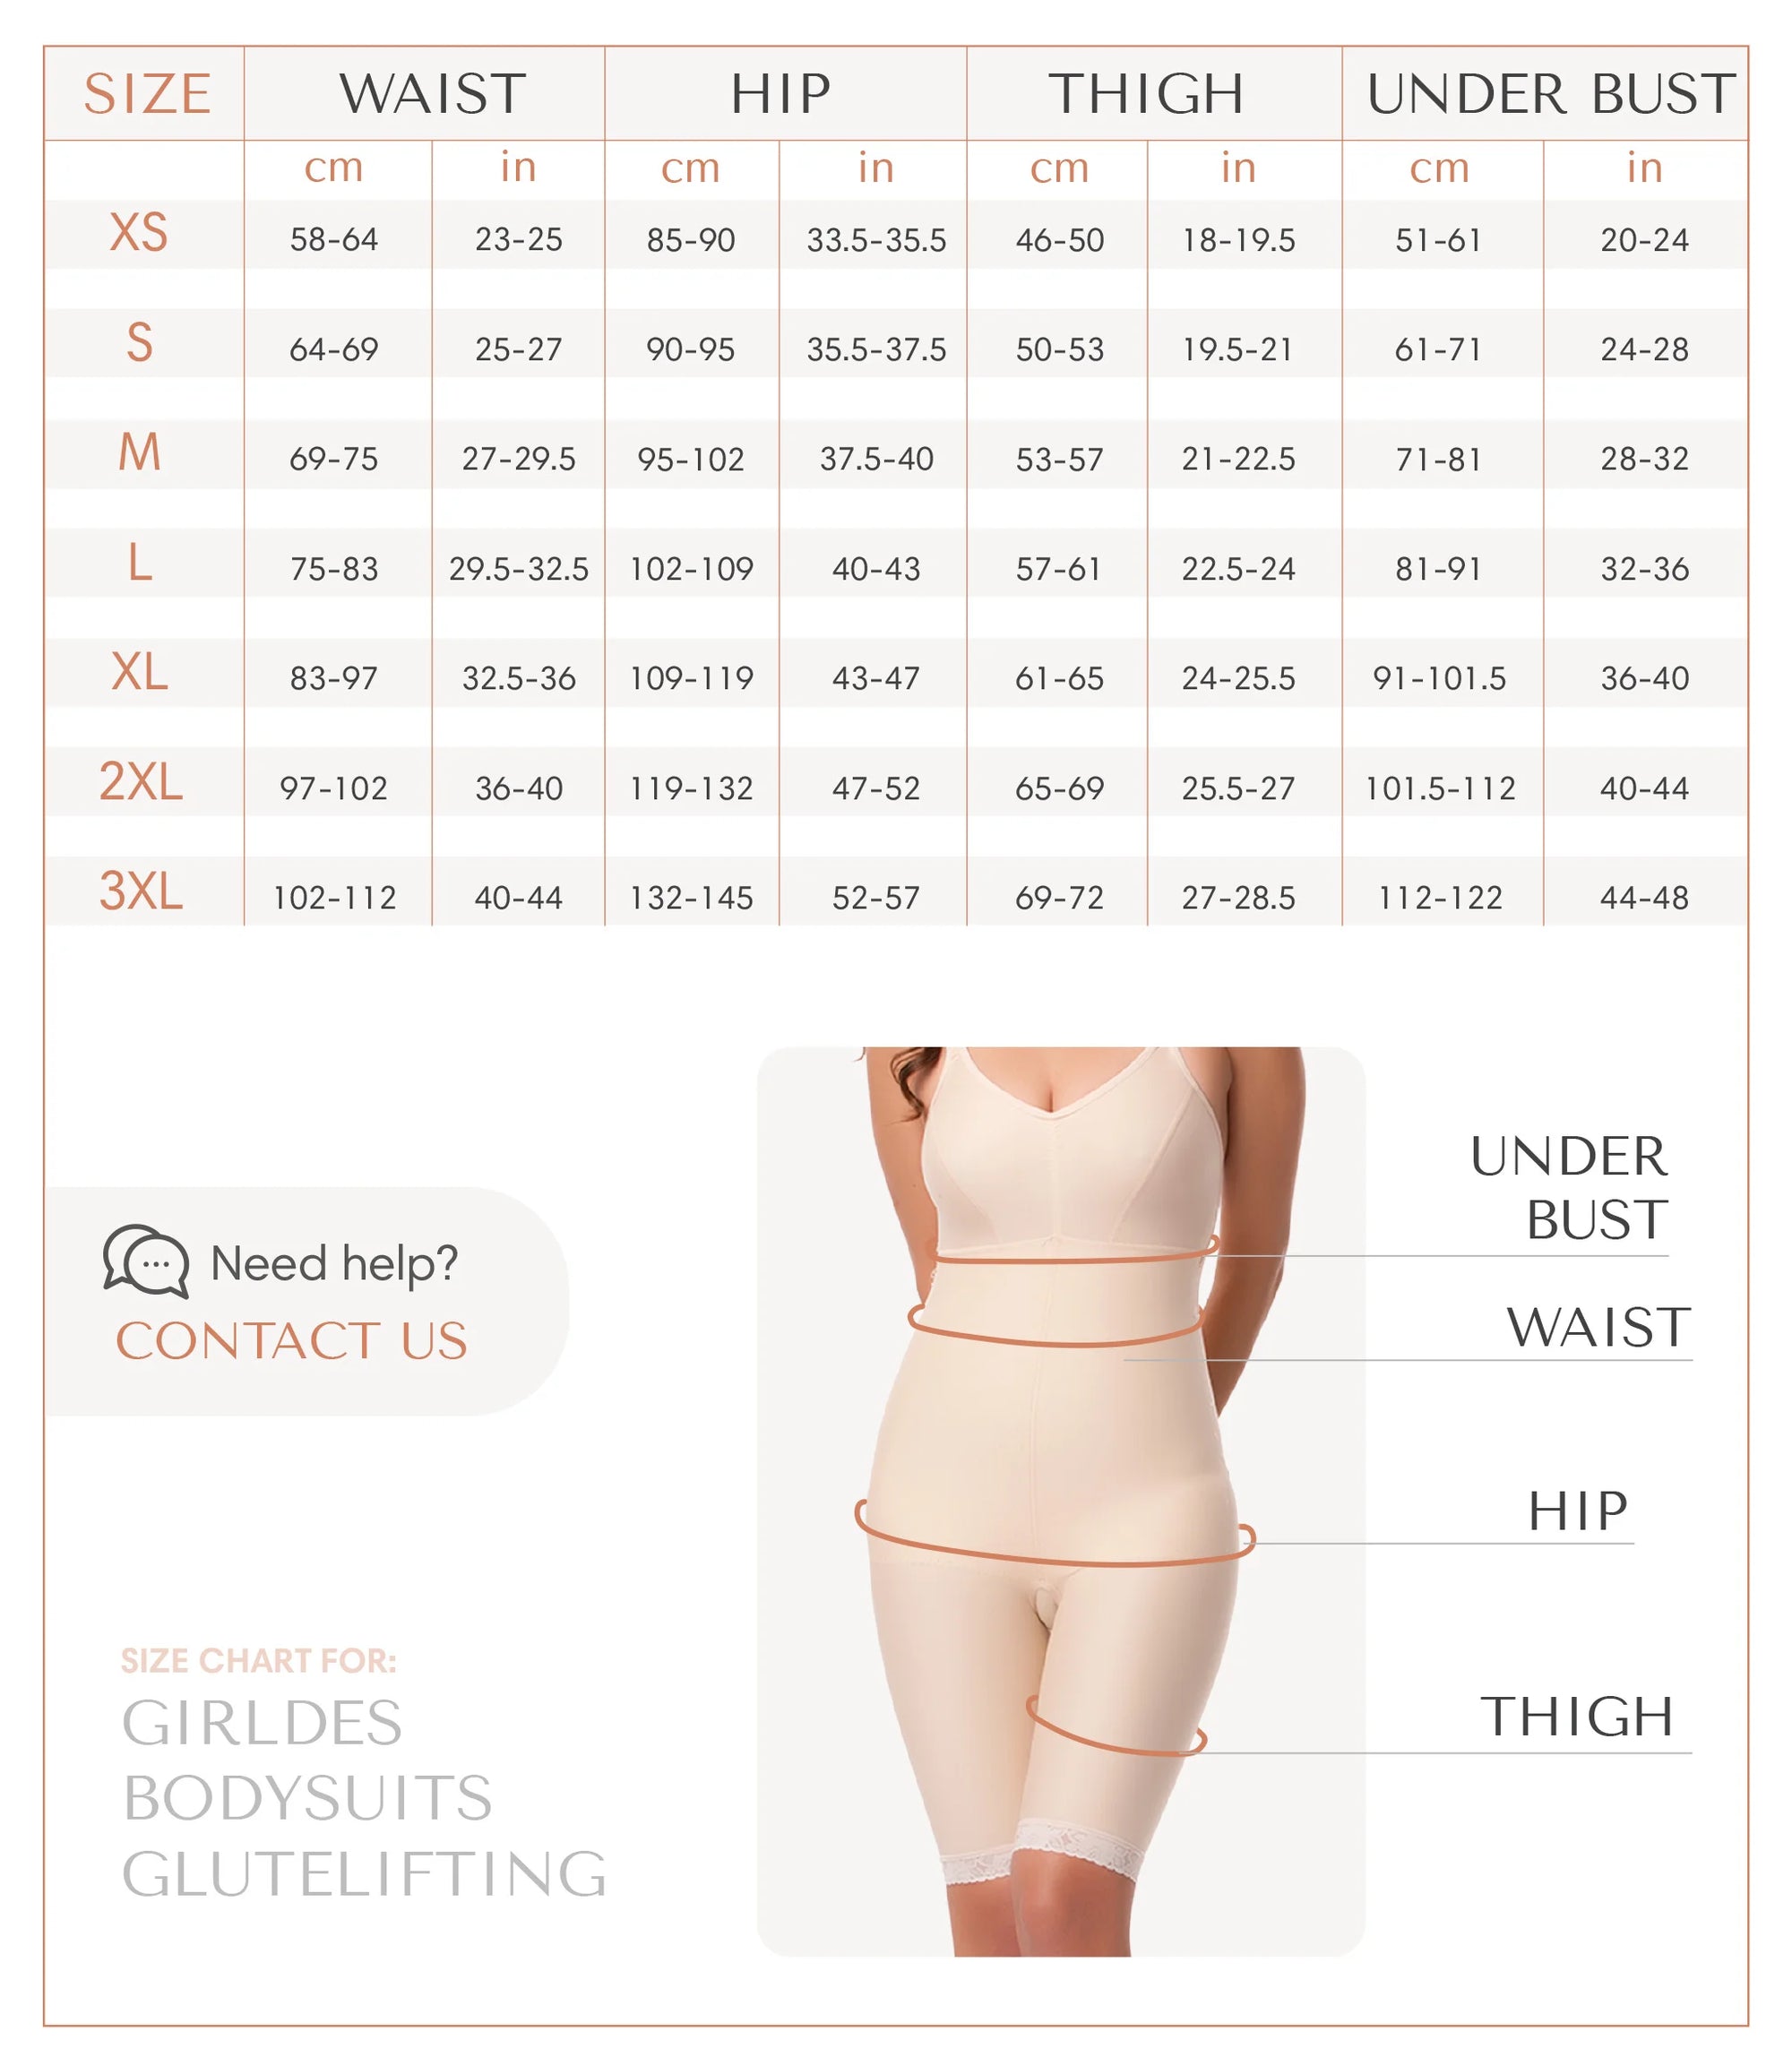 2nd Stage High Waist Panty Compression Girdle (GR02)